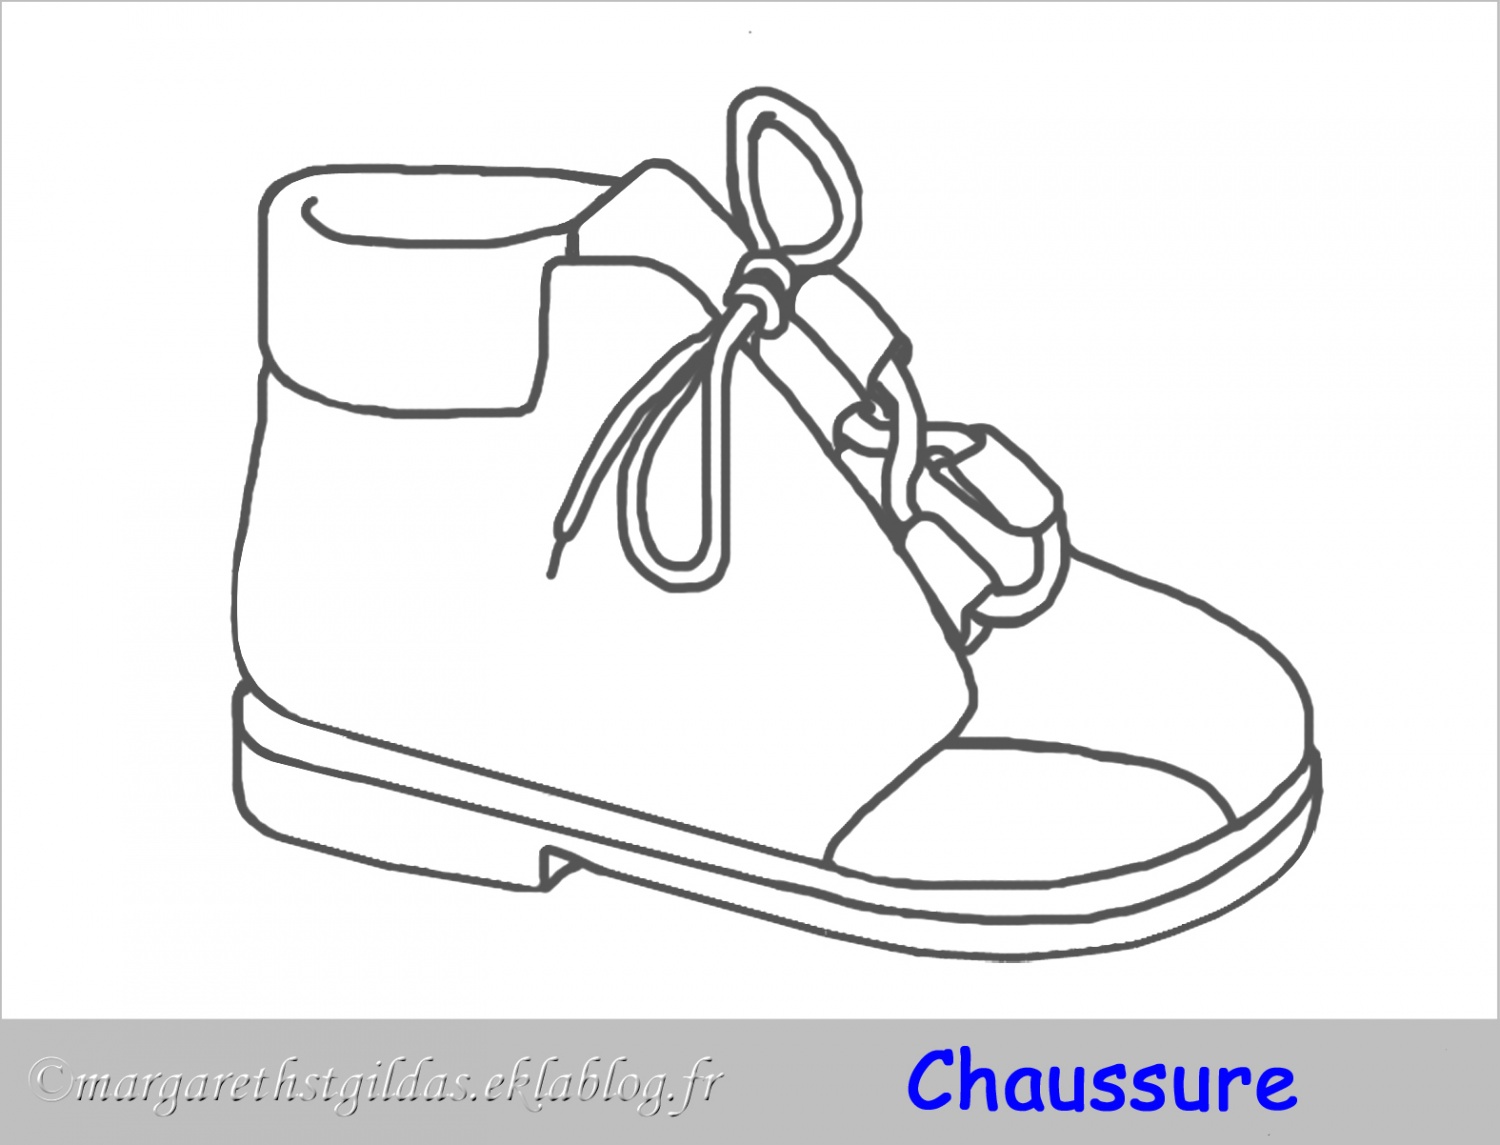 Coloriage : chaussure - margareth